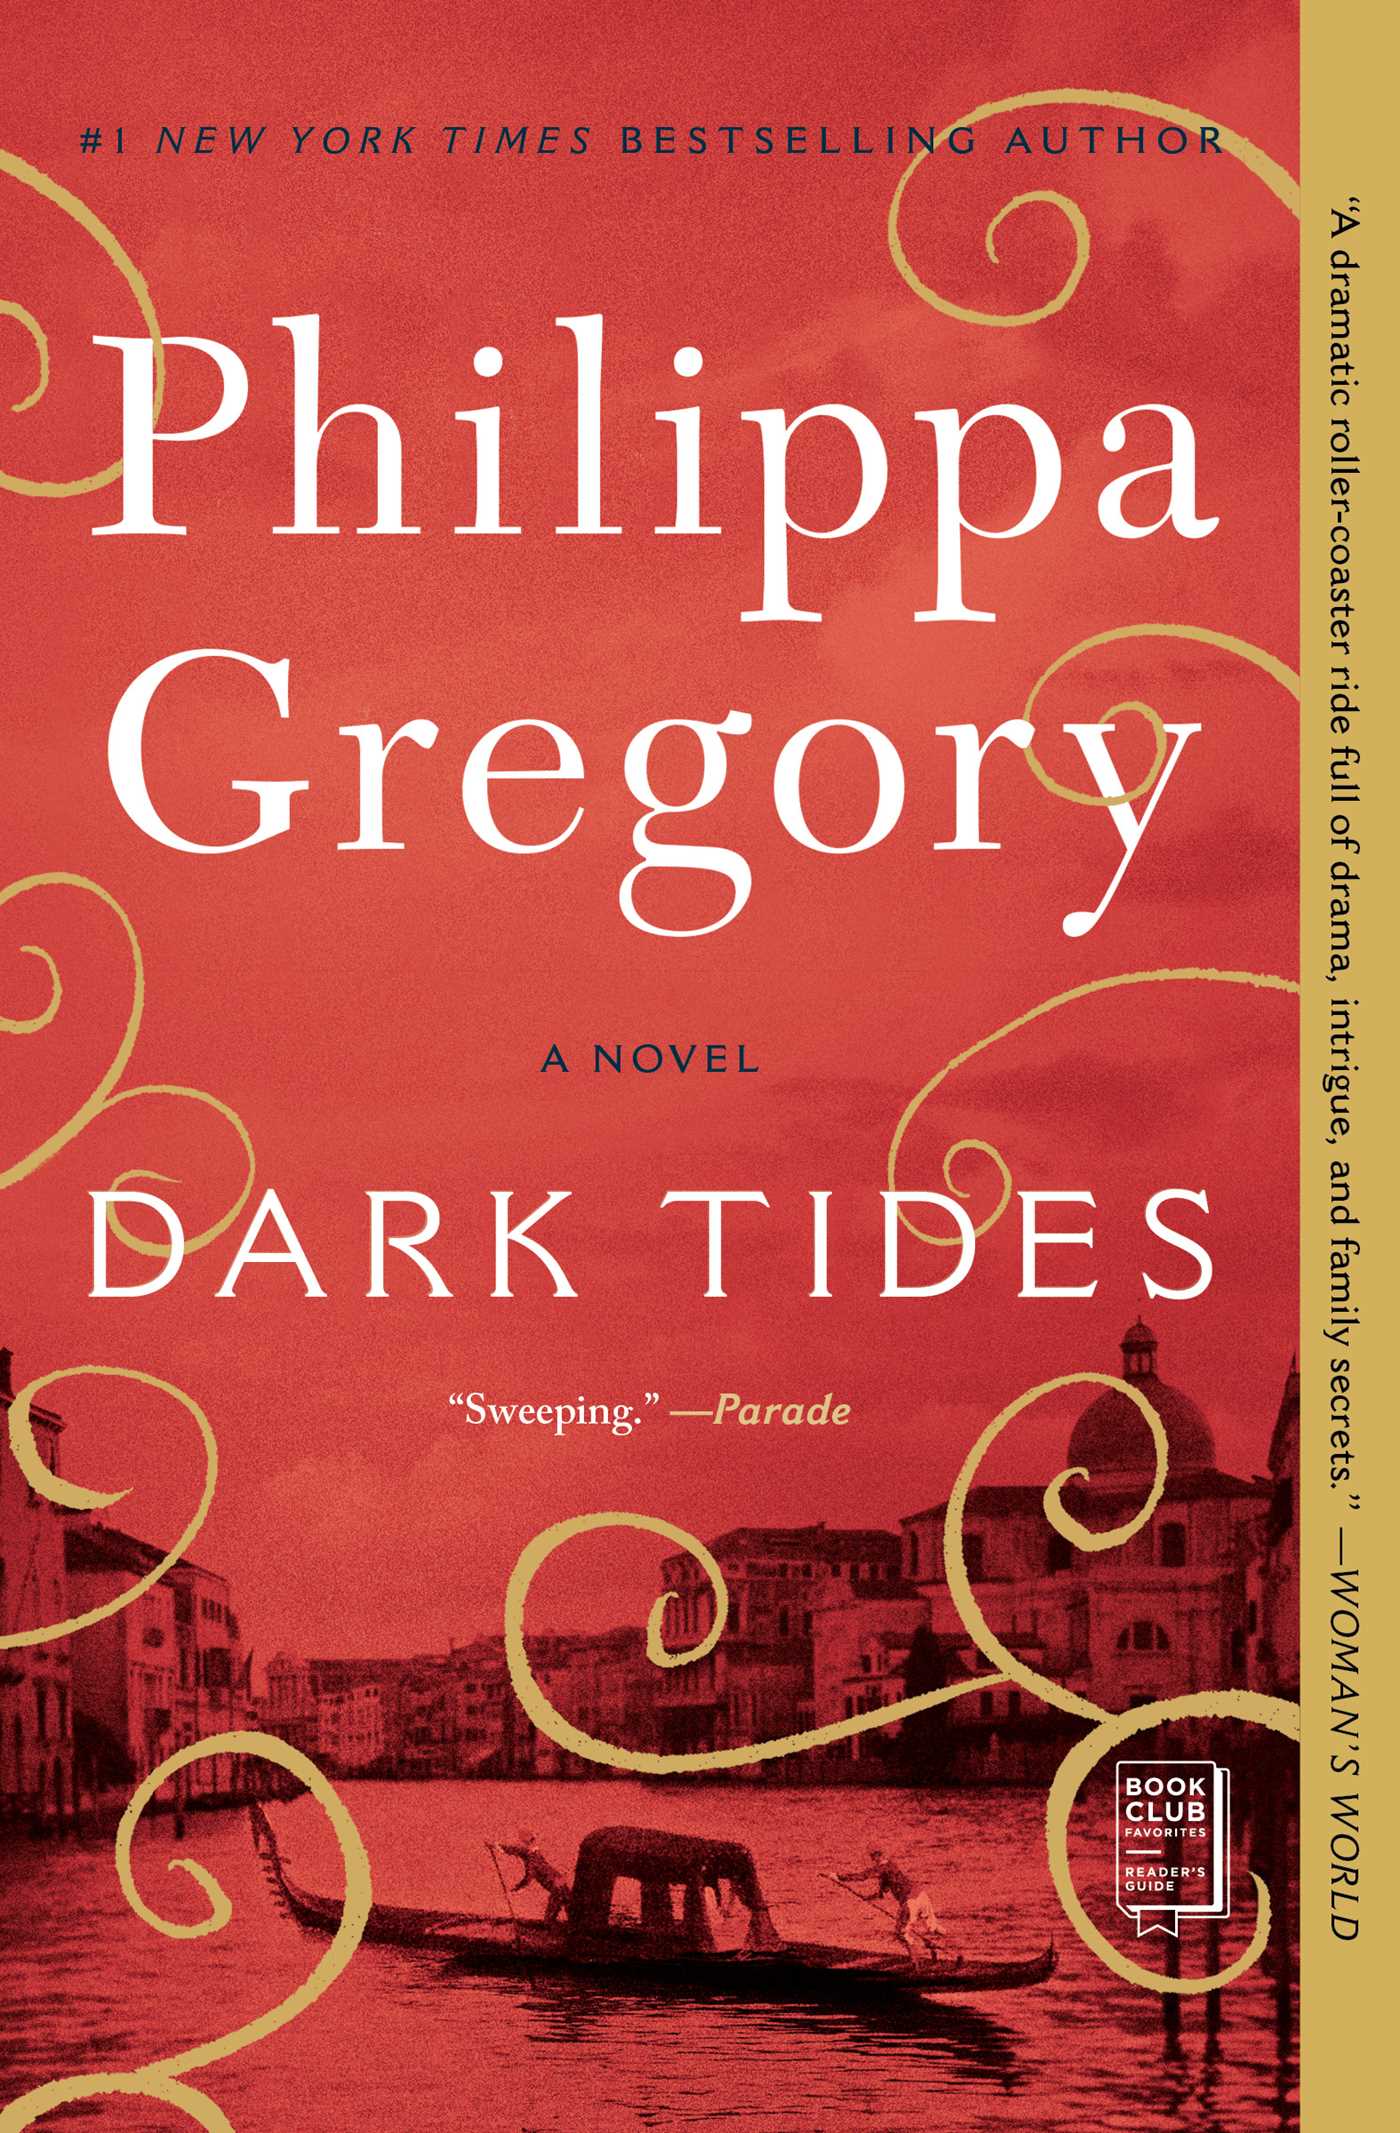 Dark Tides by Philippa Gregory PDF Download